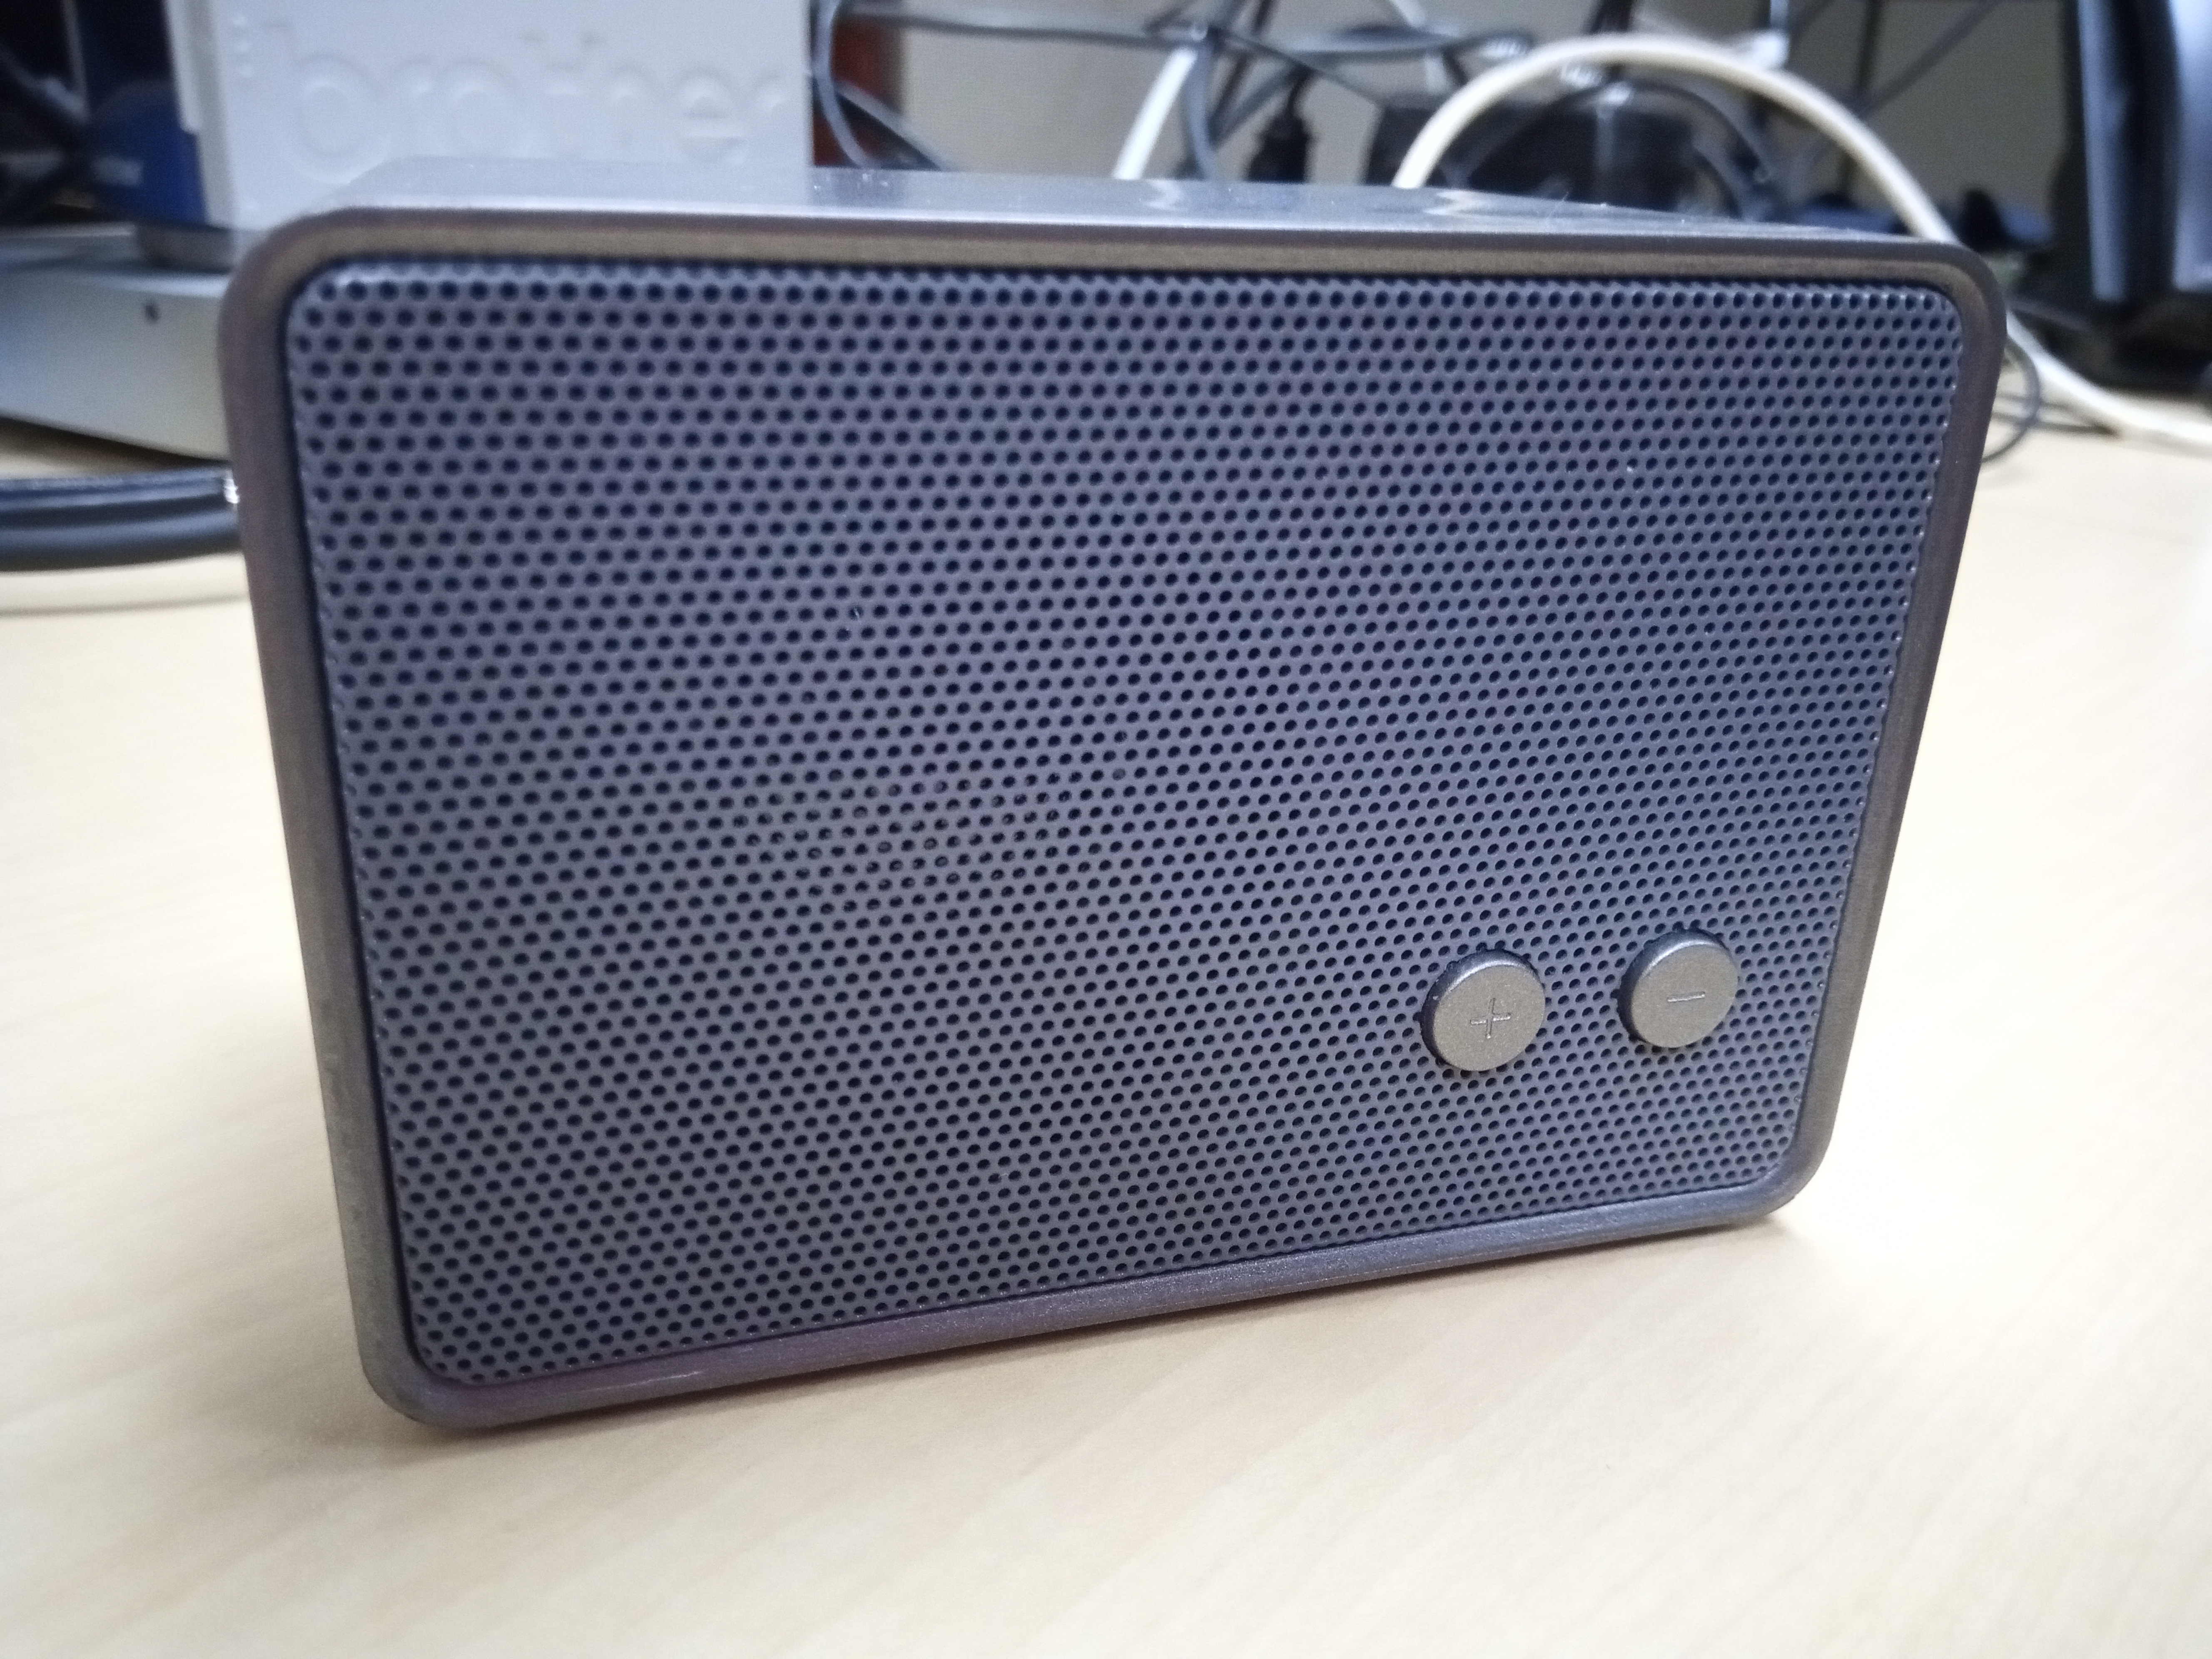 Aukey Bluetooth Speaker Offers Decent Sound In A Compact Size